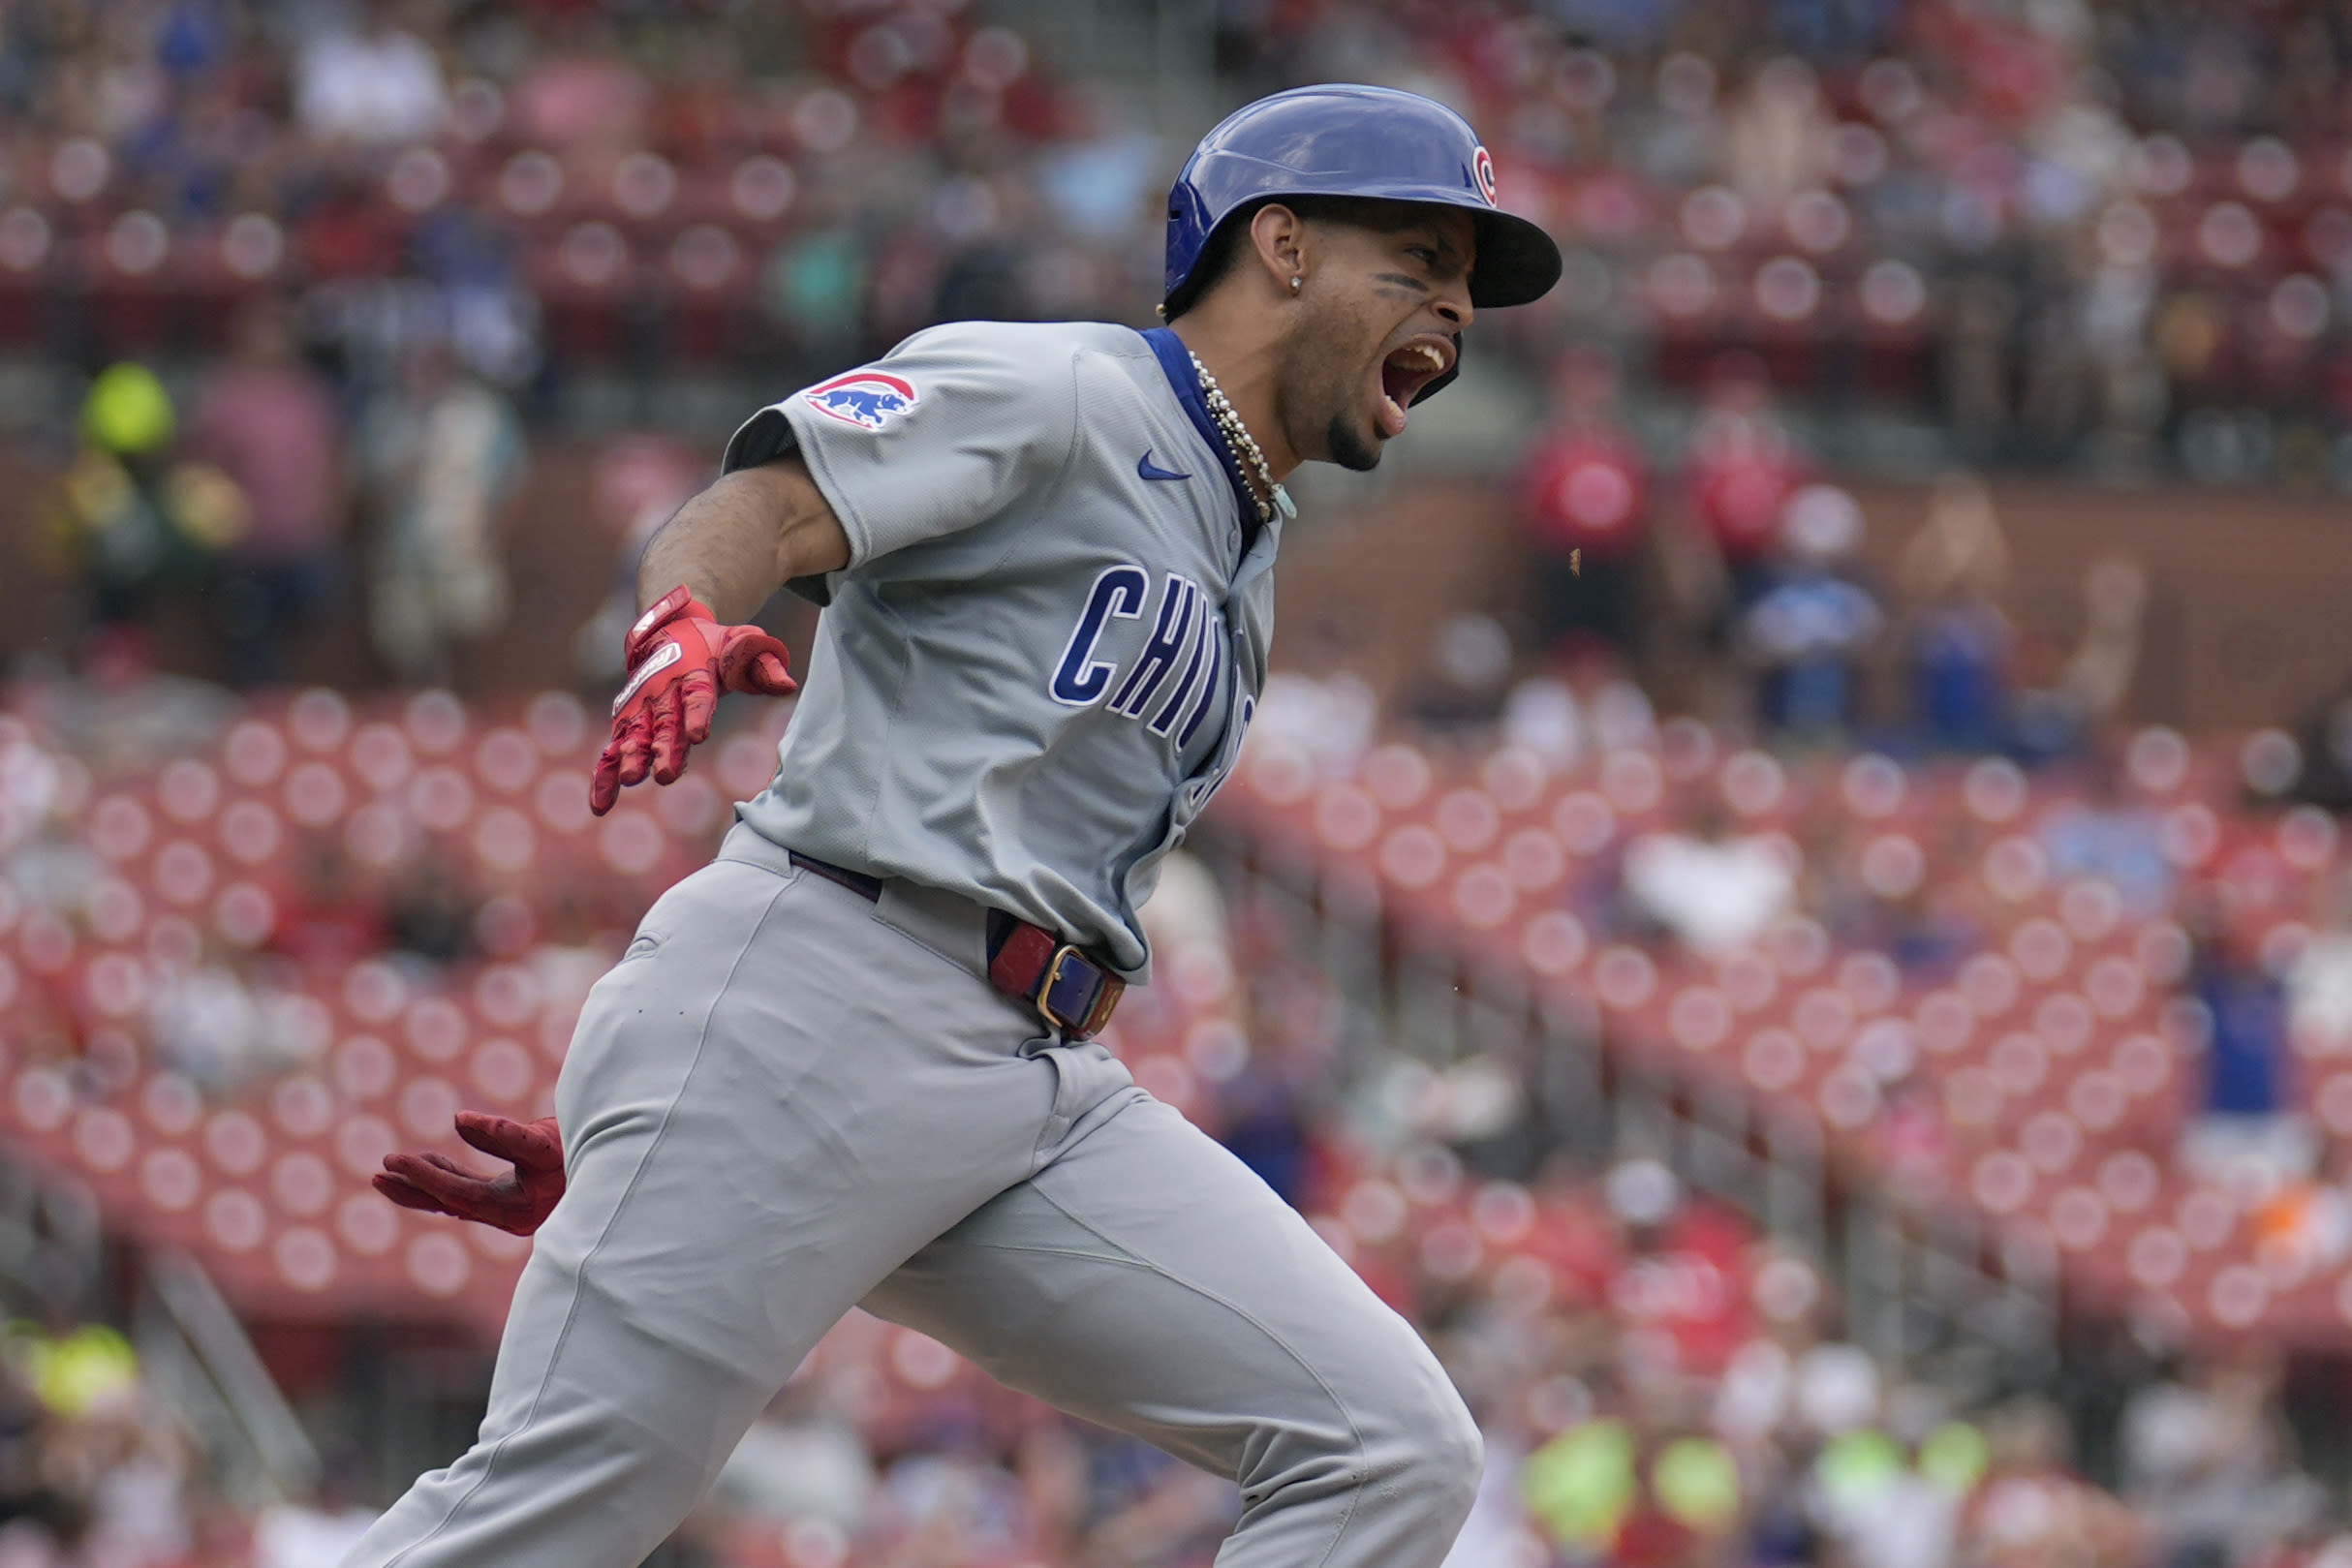 Morel and Crow-Armstrong hit 2 HRs each, lifting the Cubs over the Cardinals 8-3